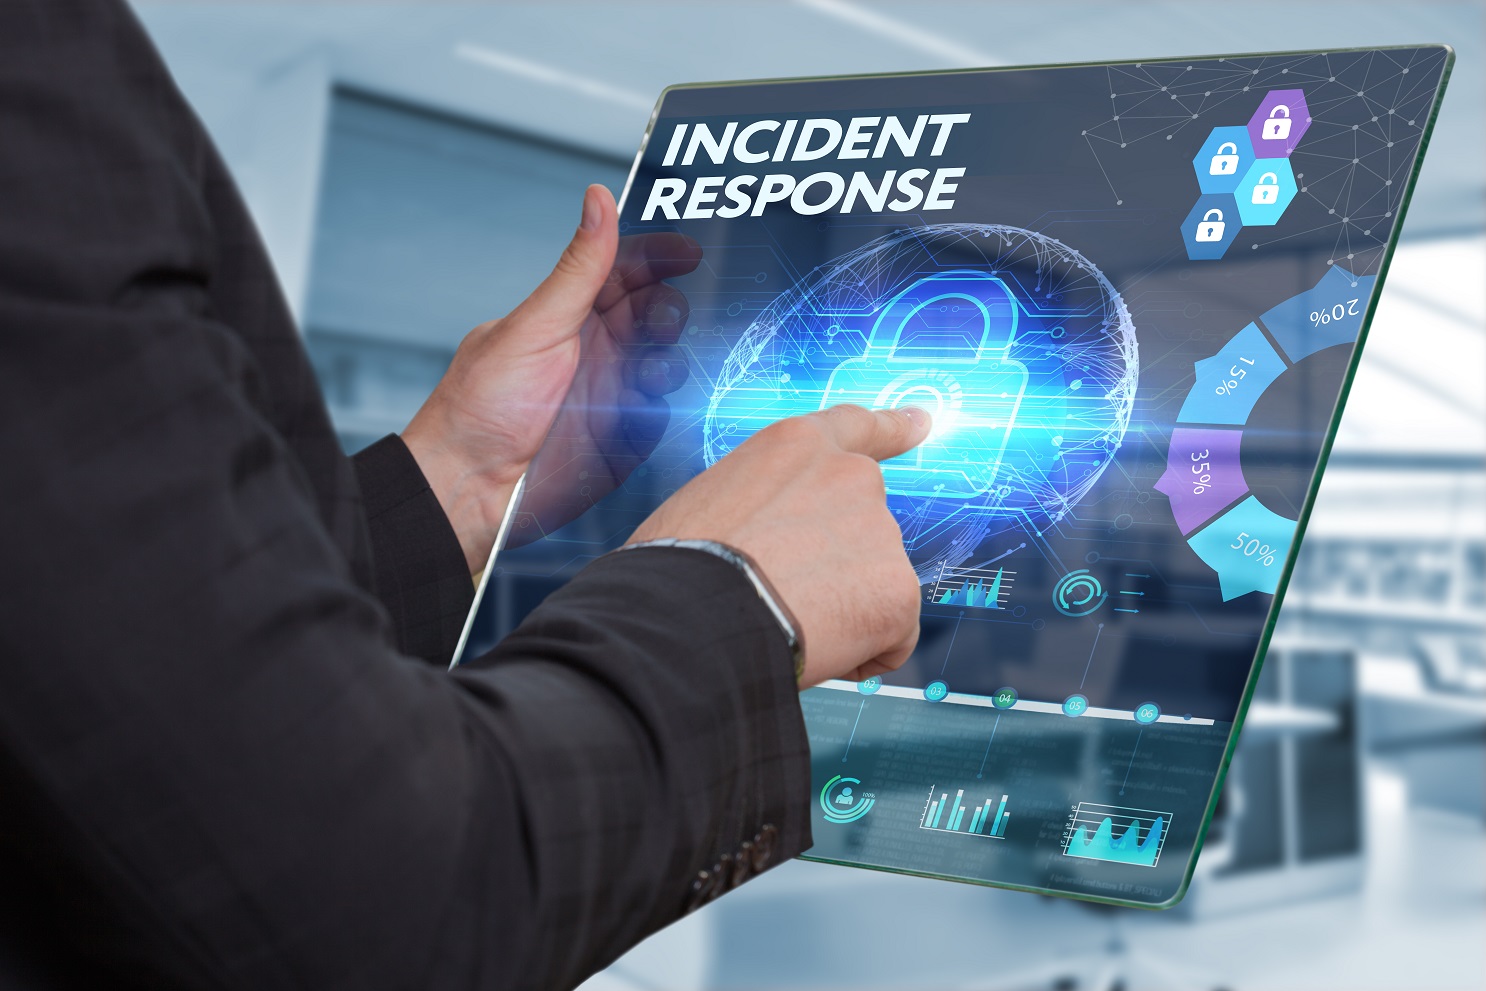 New obligations to report cyber incidents - critical infrastructure